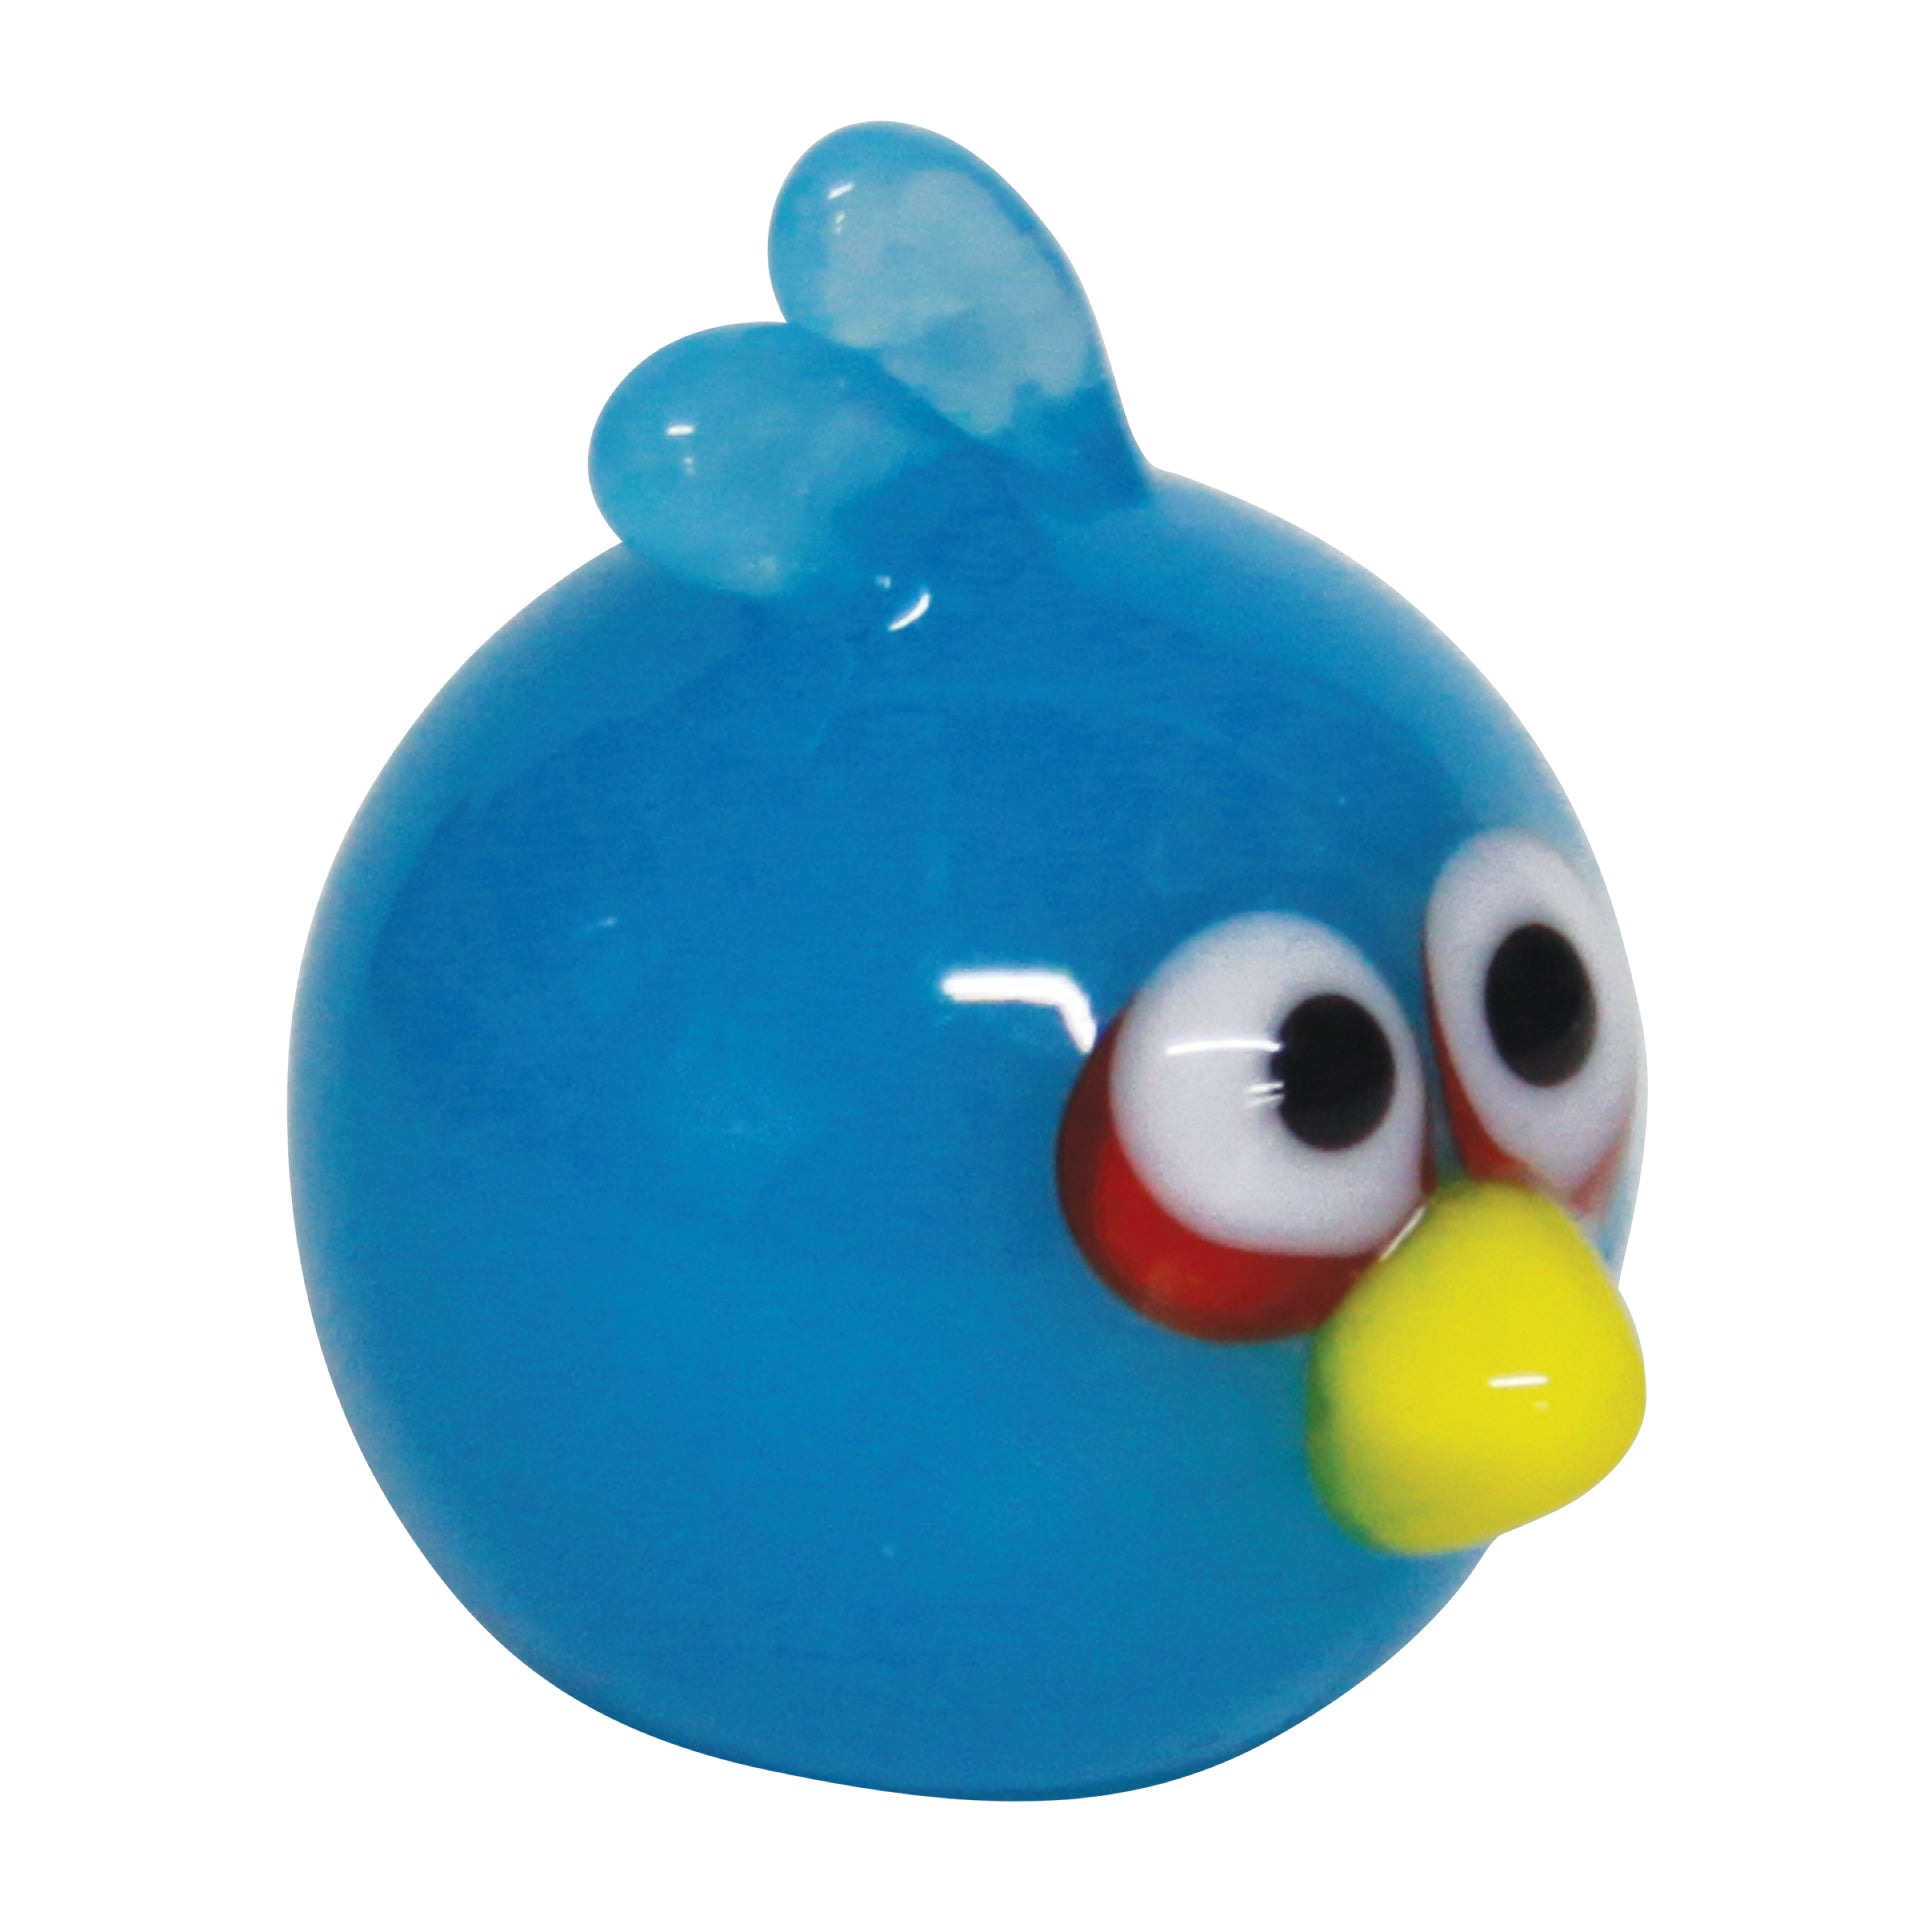 GlassWorld Angry Birds Blue Bird collectible miniature glass figurine Product Image